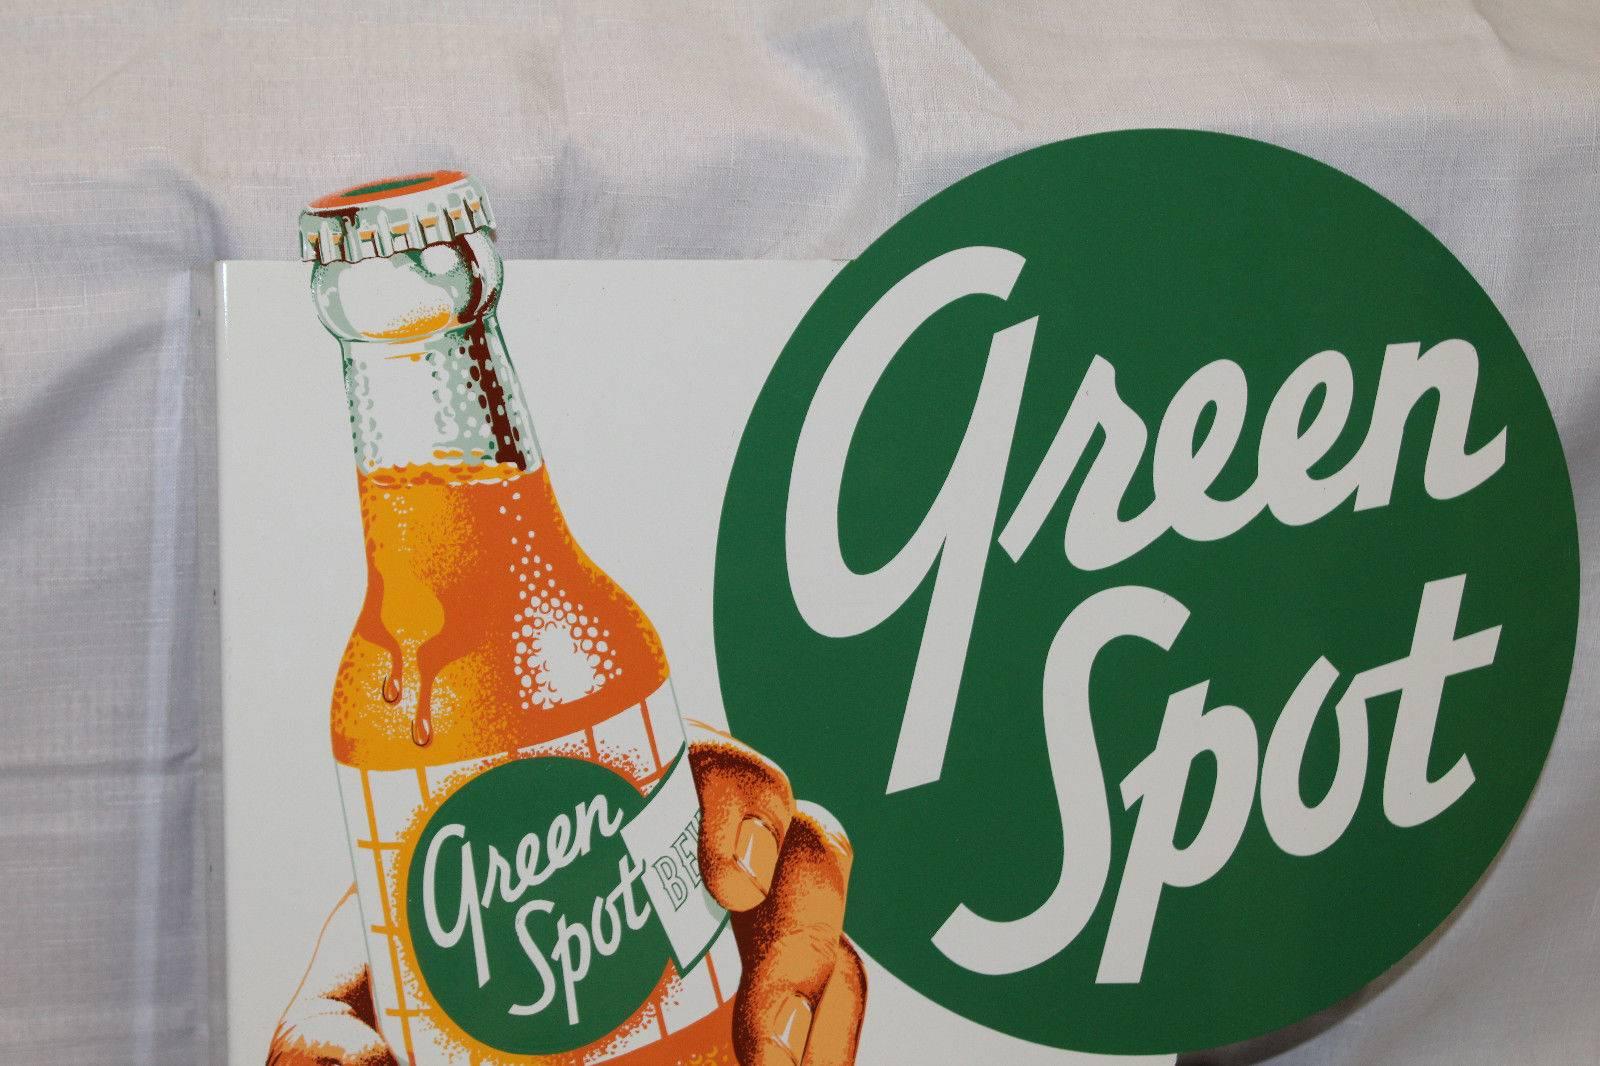 Green Spot was founded in 1934 in the United States after the introduction of Orangeade, the brand established operations in Thailand in 1954. This style of labeling was only made during the 1930s-1960s. Then they changed their logo.